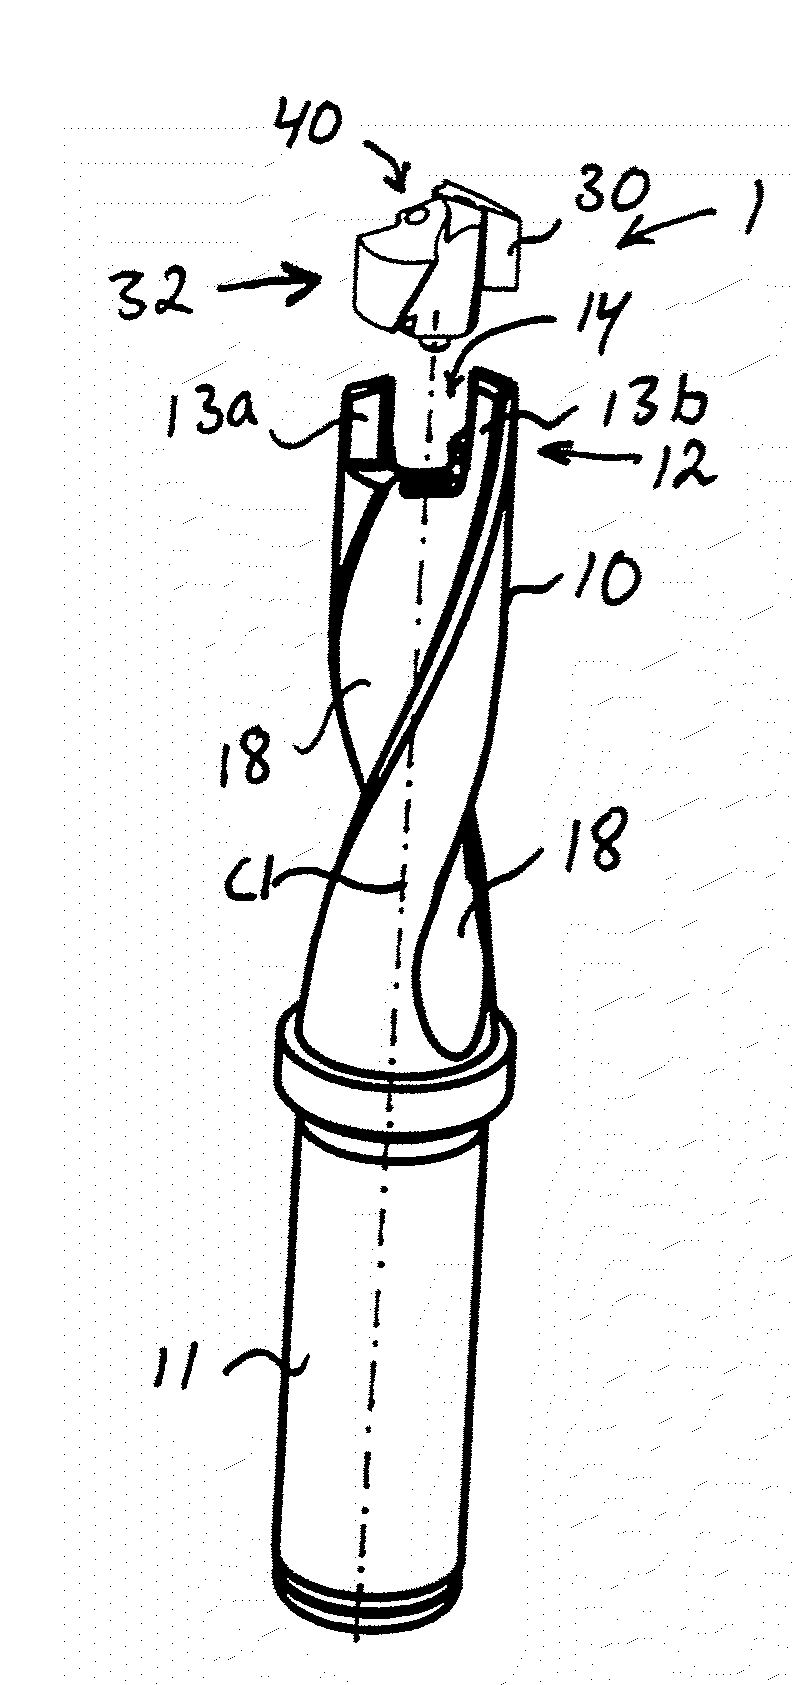 Tool, tool body and cutting head